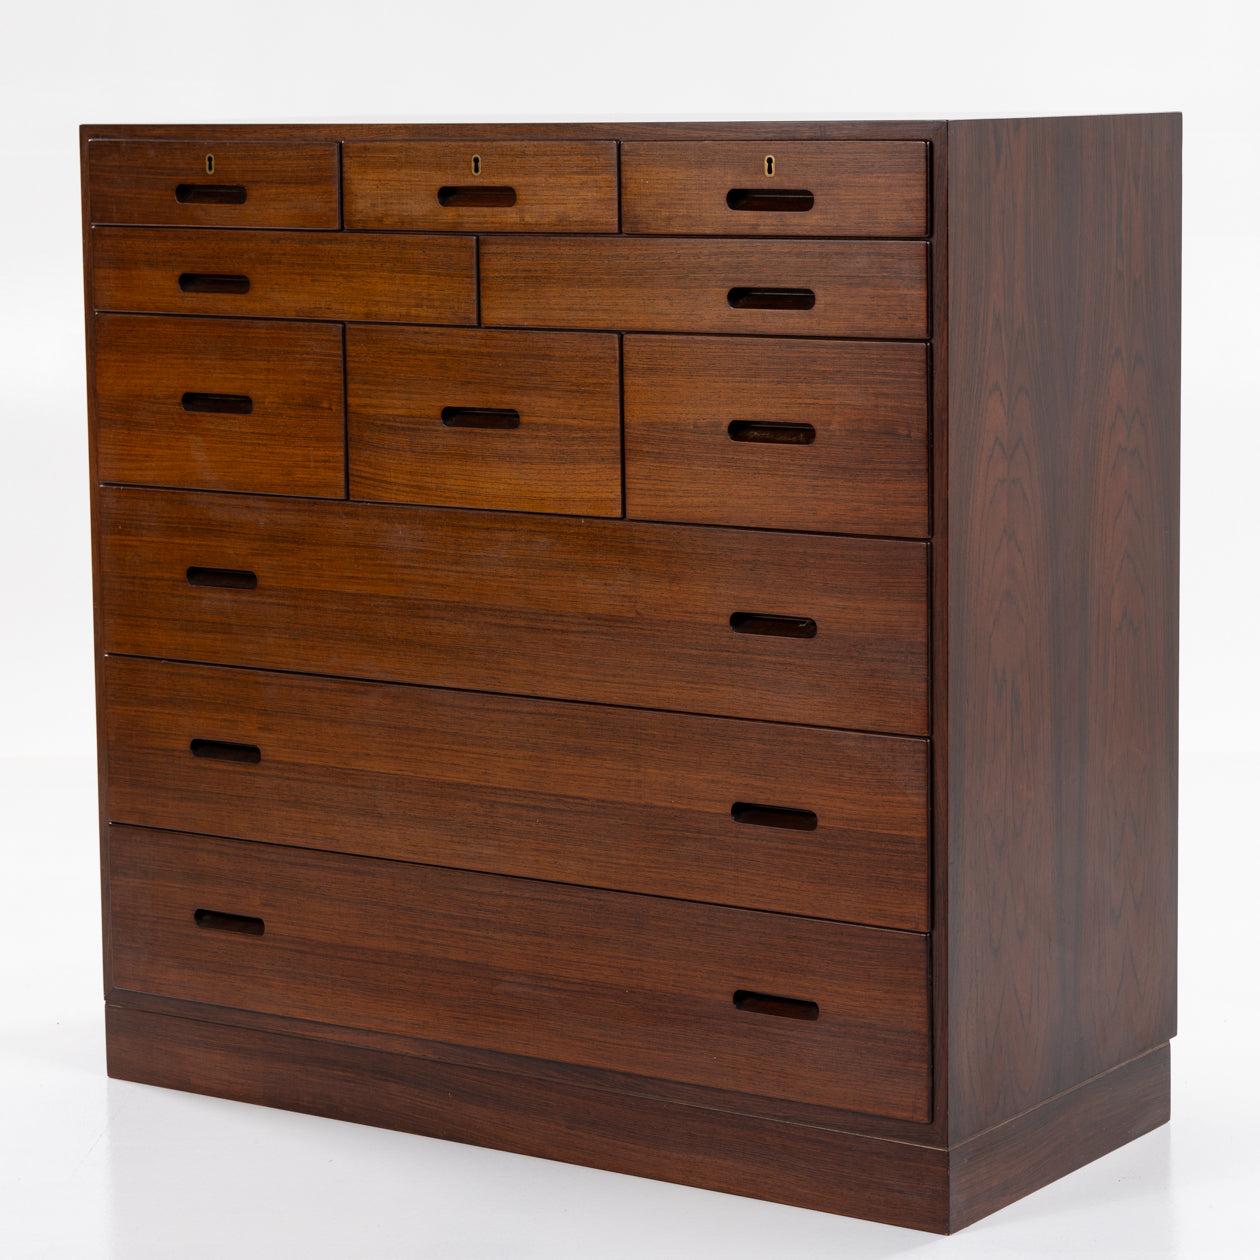 Chest of drawers in rosewood with 11 drawers in different sizes.
Manufactered by P. Jeppesen.